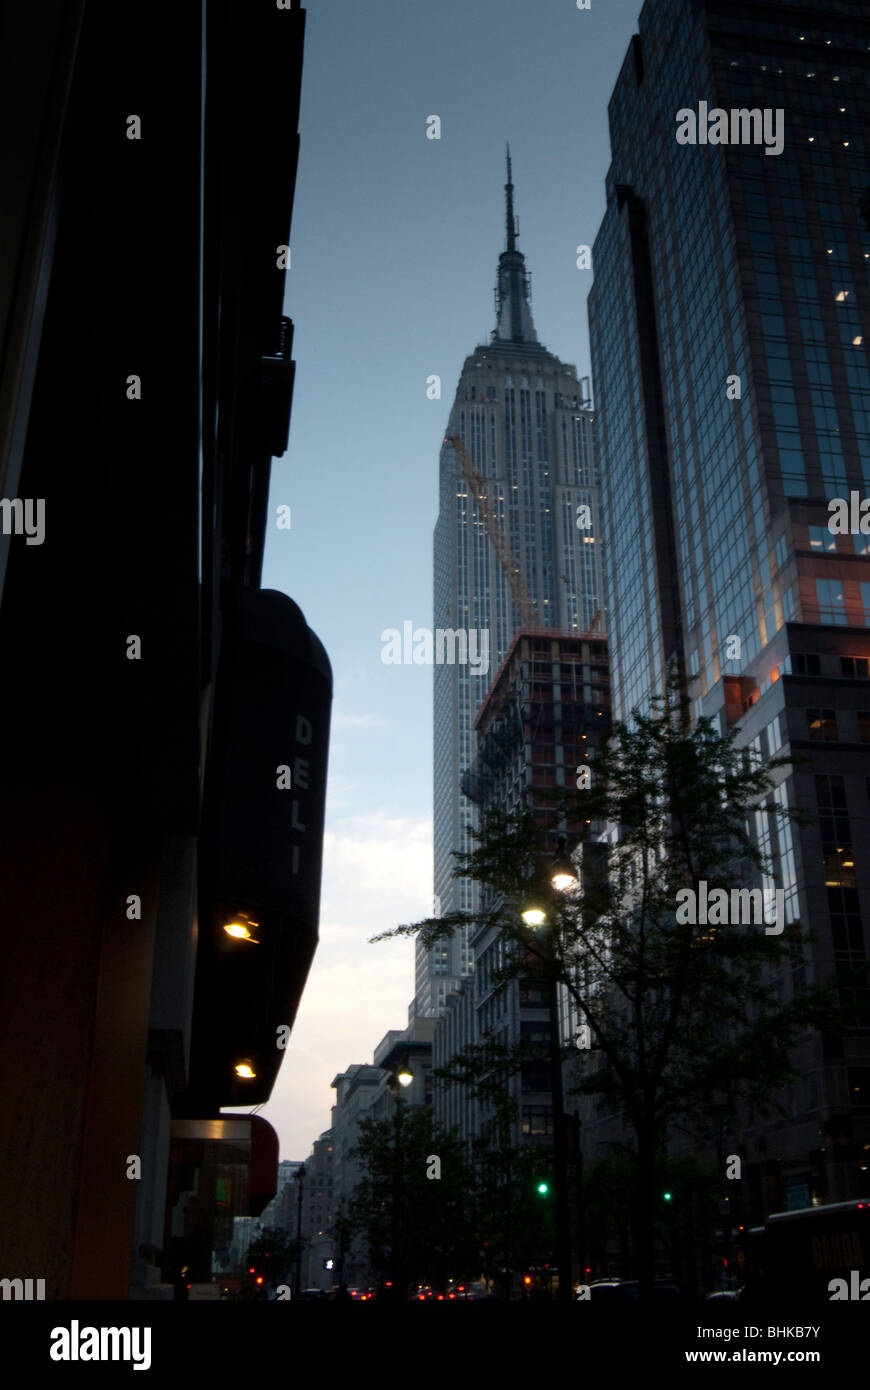 Fifth Avenue, New York looking toward the empire state building at dusk Stock Photo